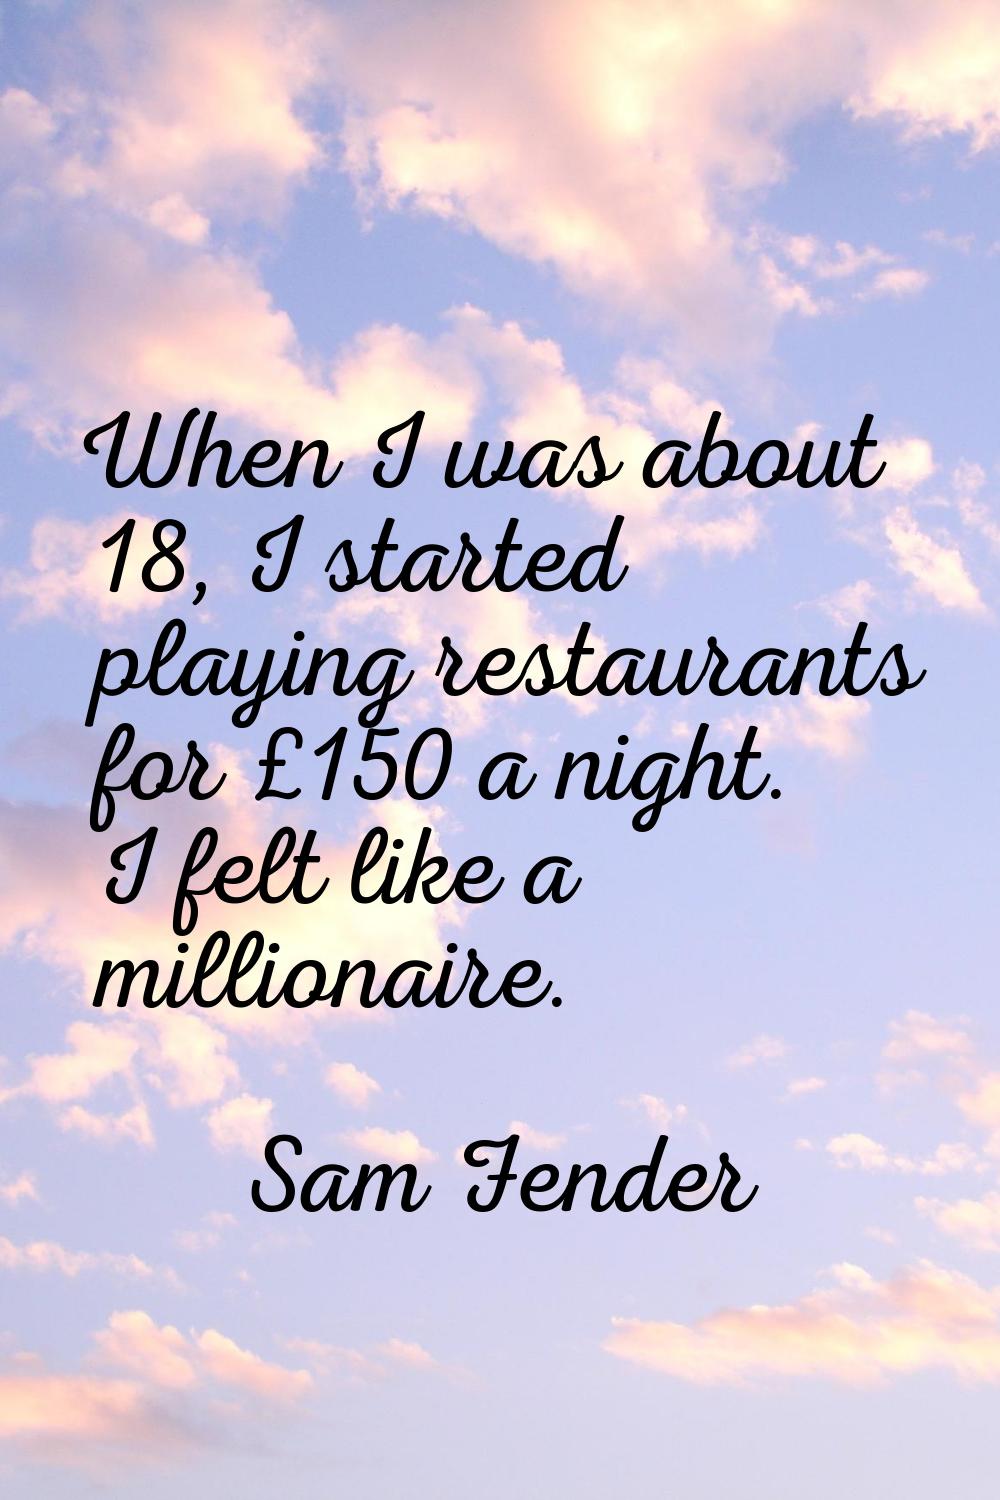 When I was about 18, I started playing restaurants for £150 a night. I felt like a millionaire.